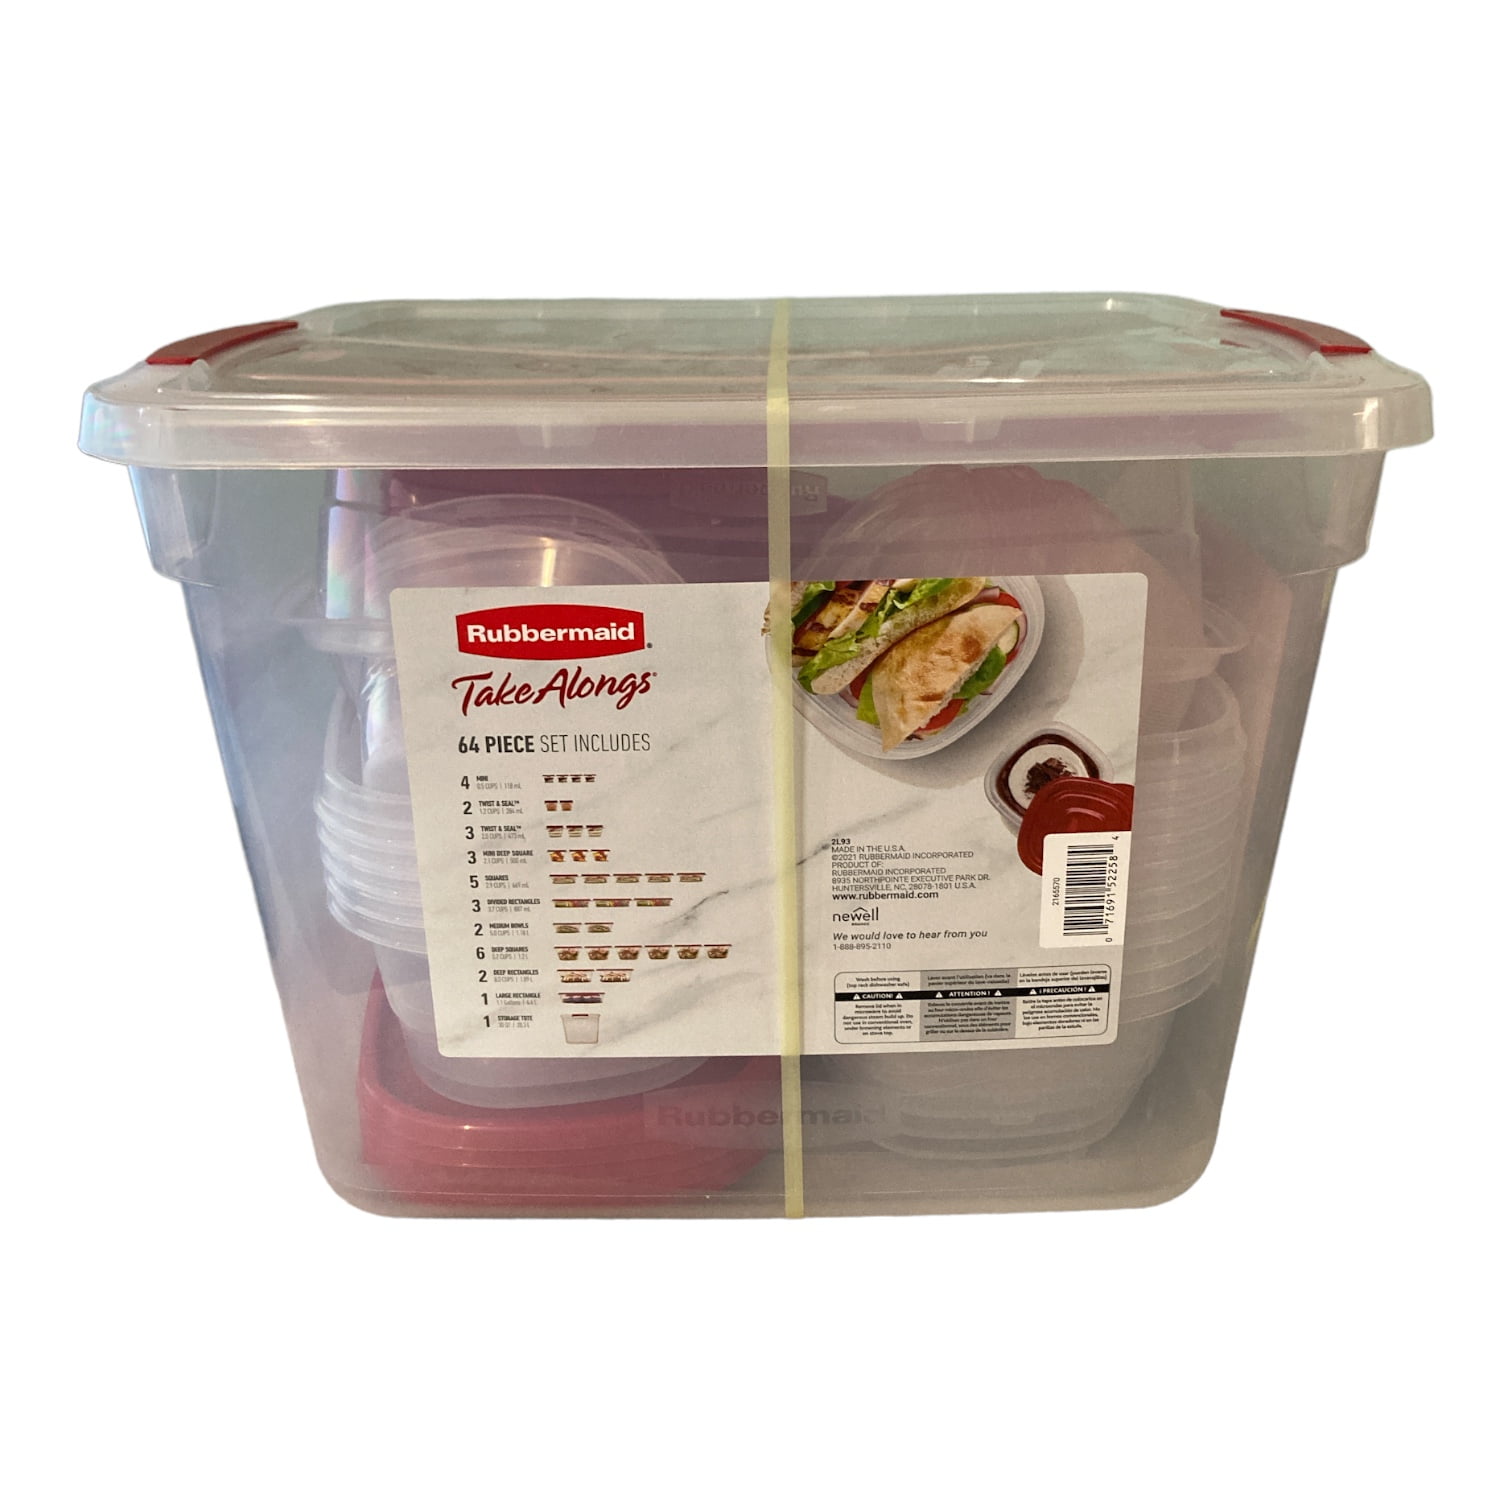 Rubbermaid Take Along 64 Piece Food Storage Containers 